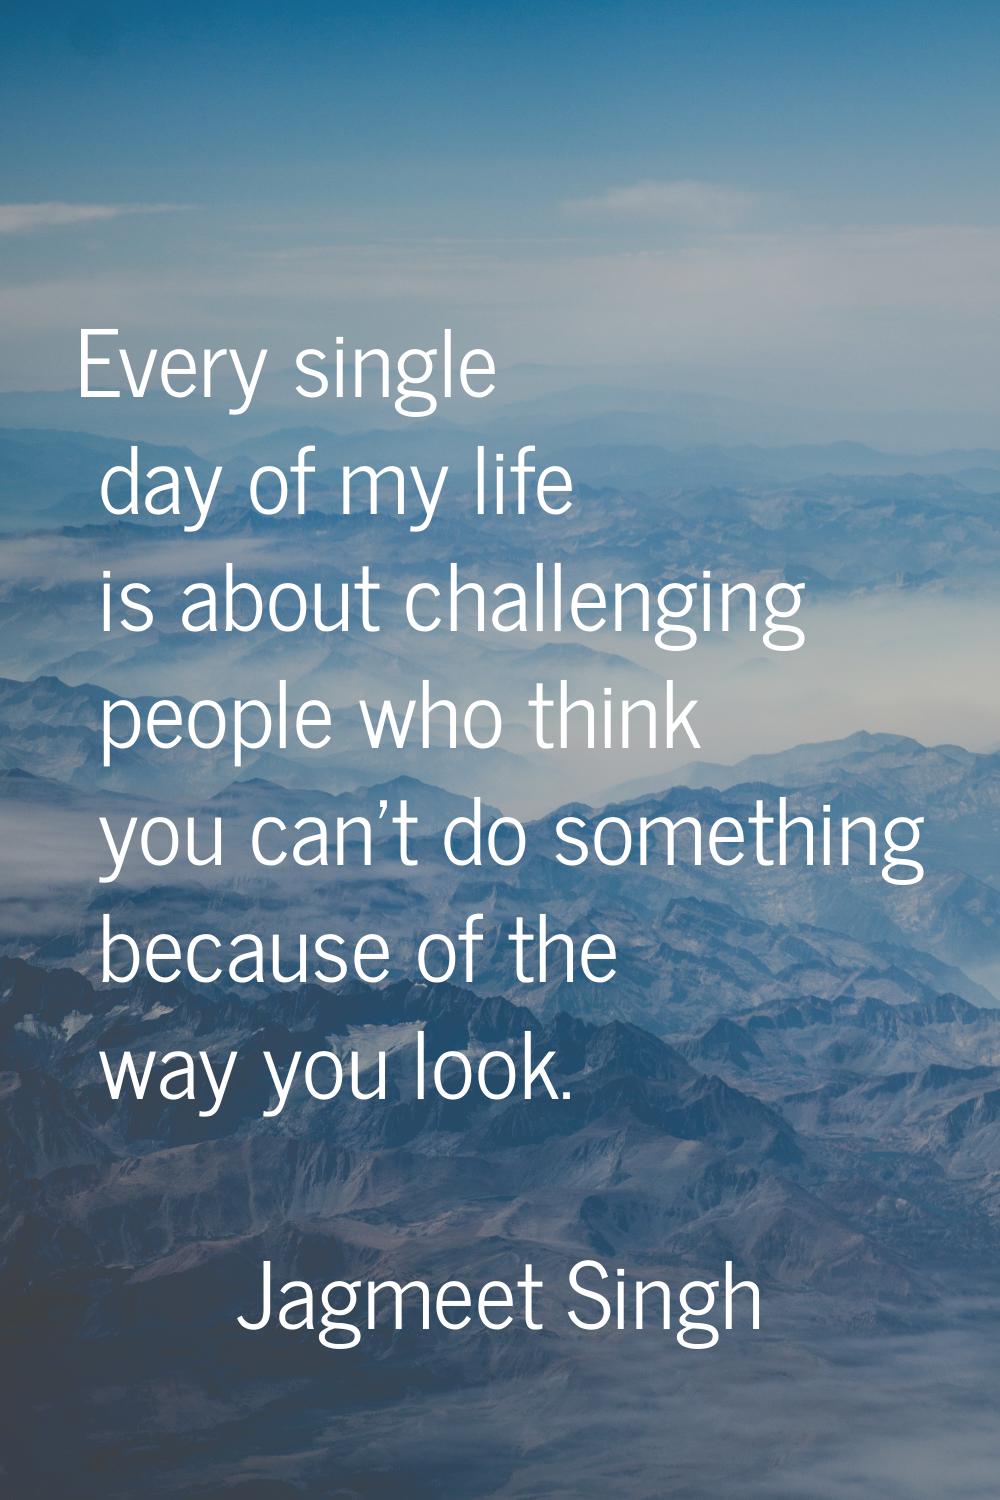 Every single day of my life is about challenging people who think you can't do something because of